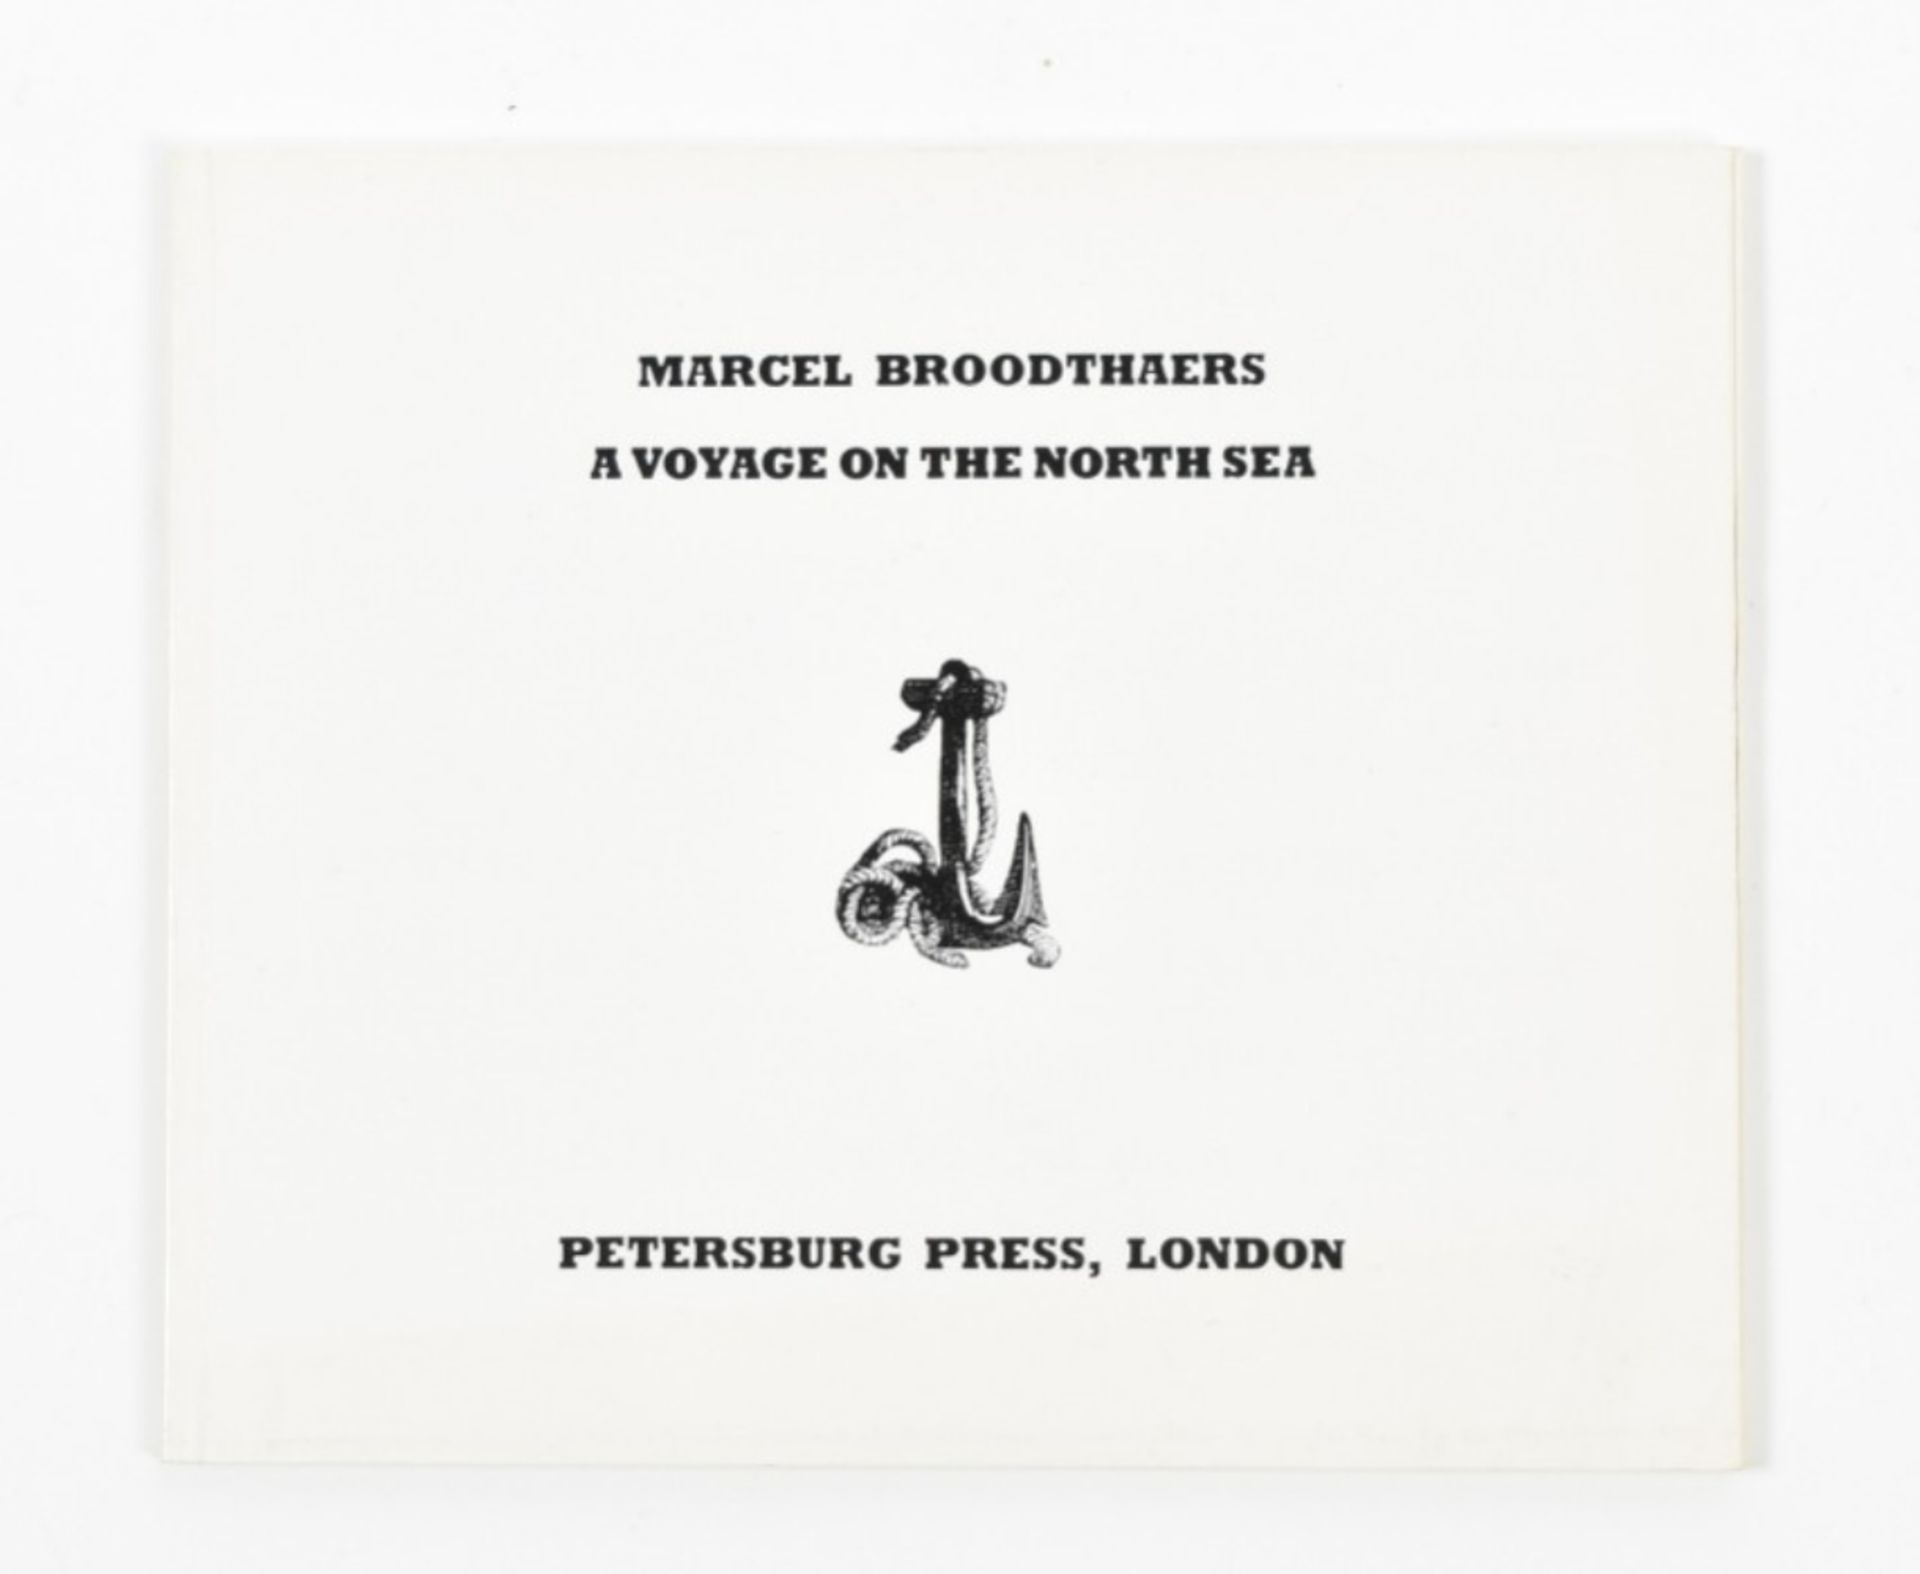 [s and 1970s] Marcel Broodthaers - Image 6 of 6